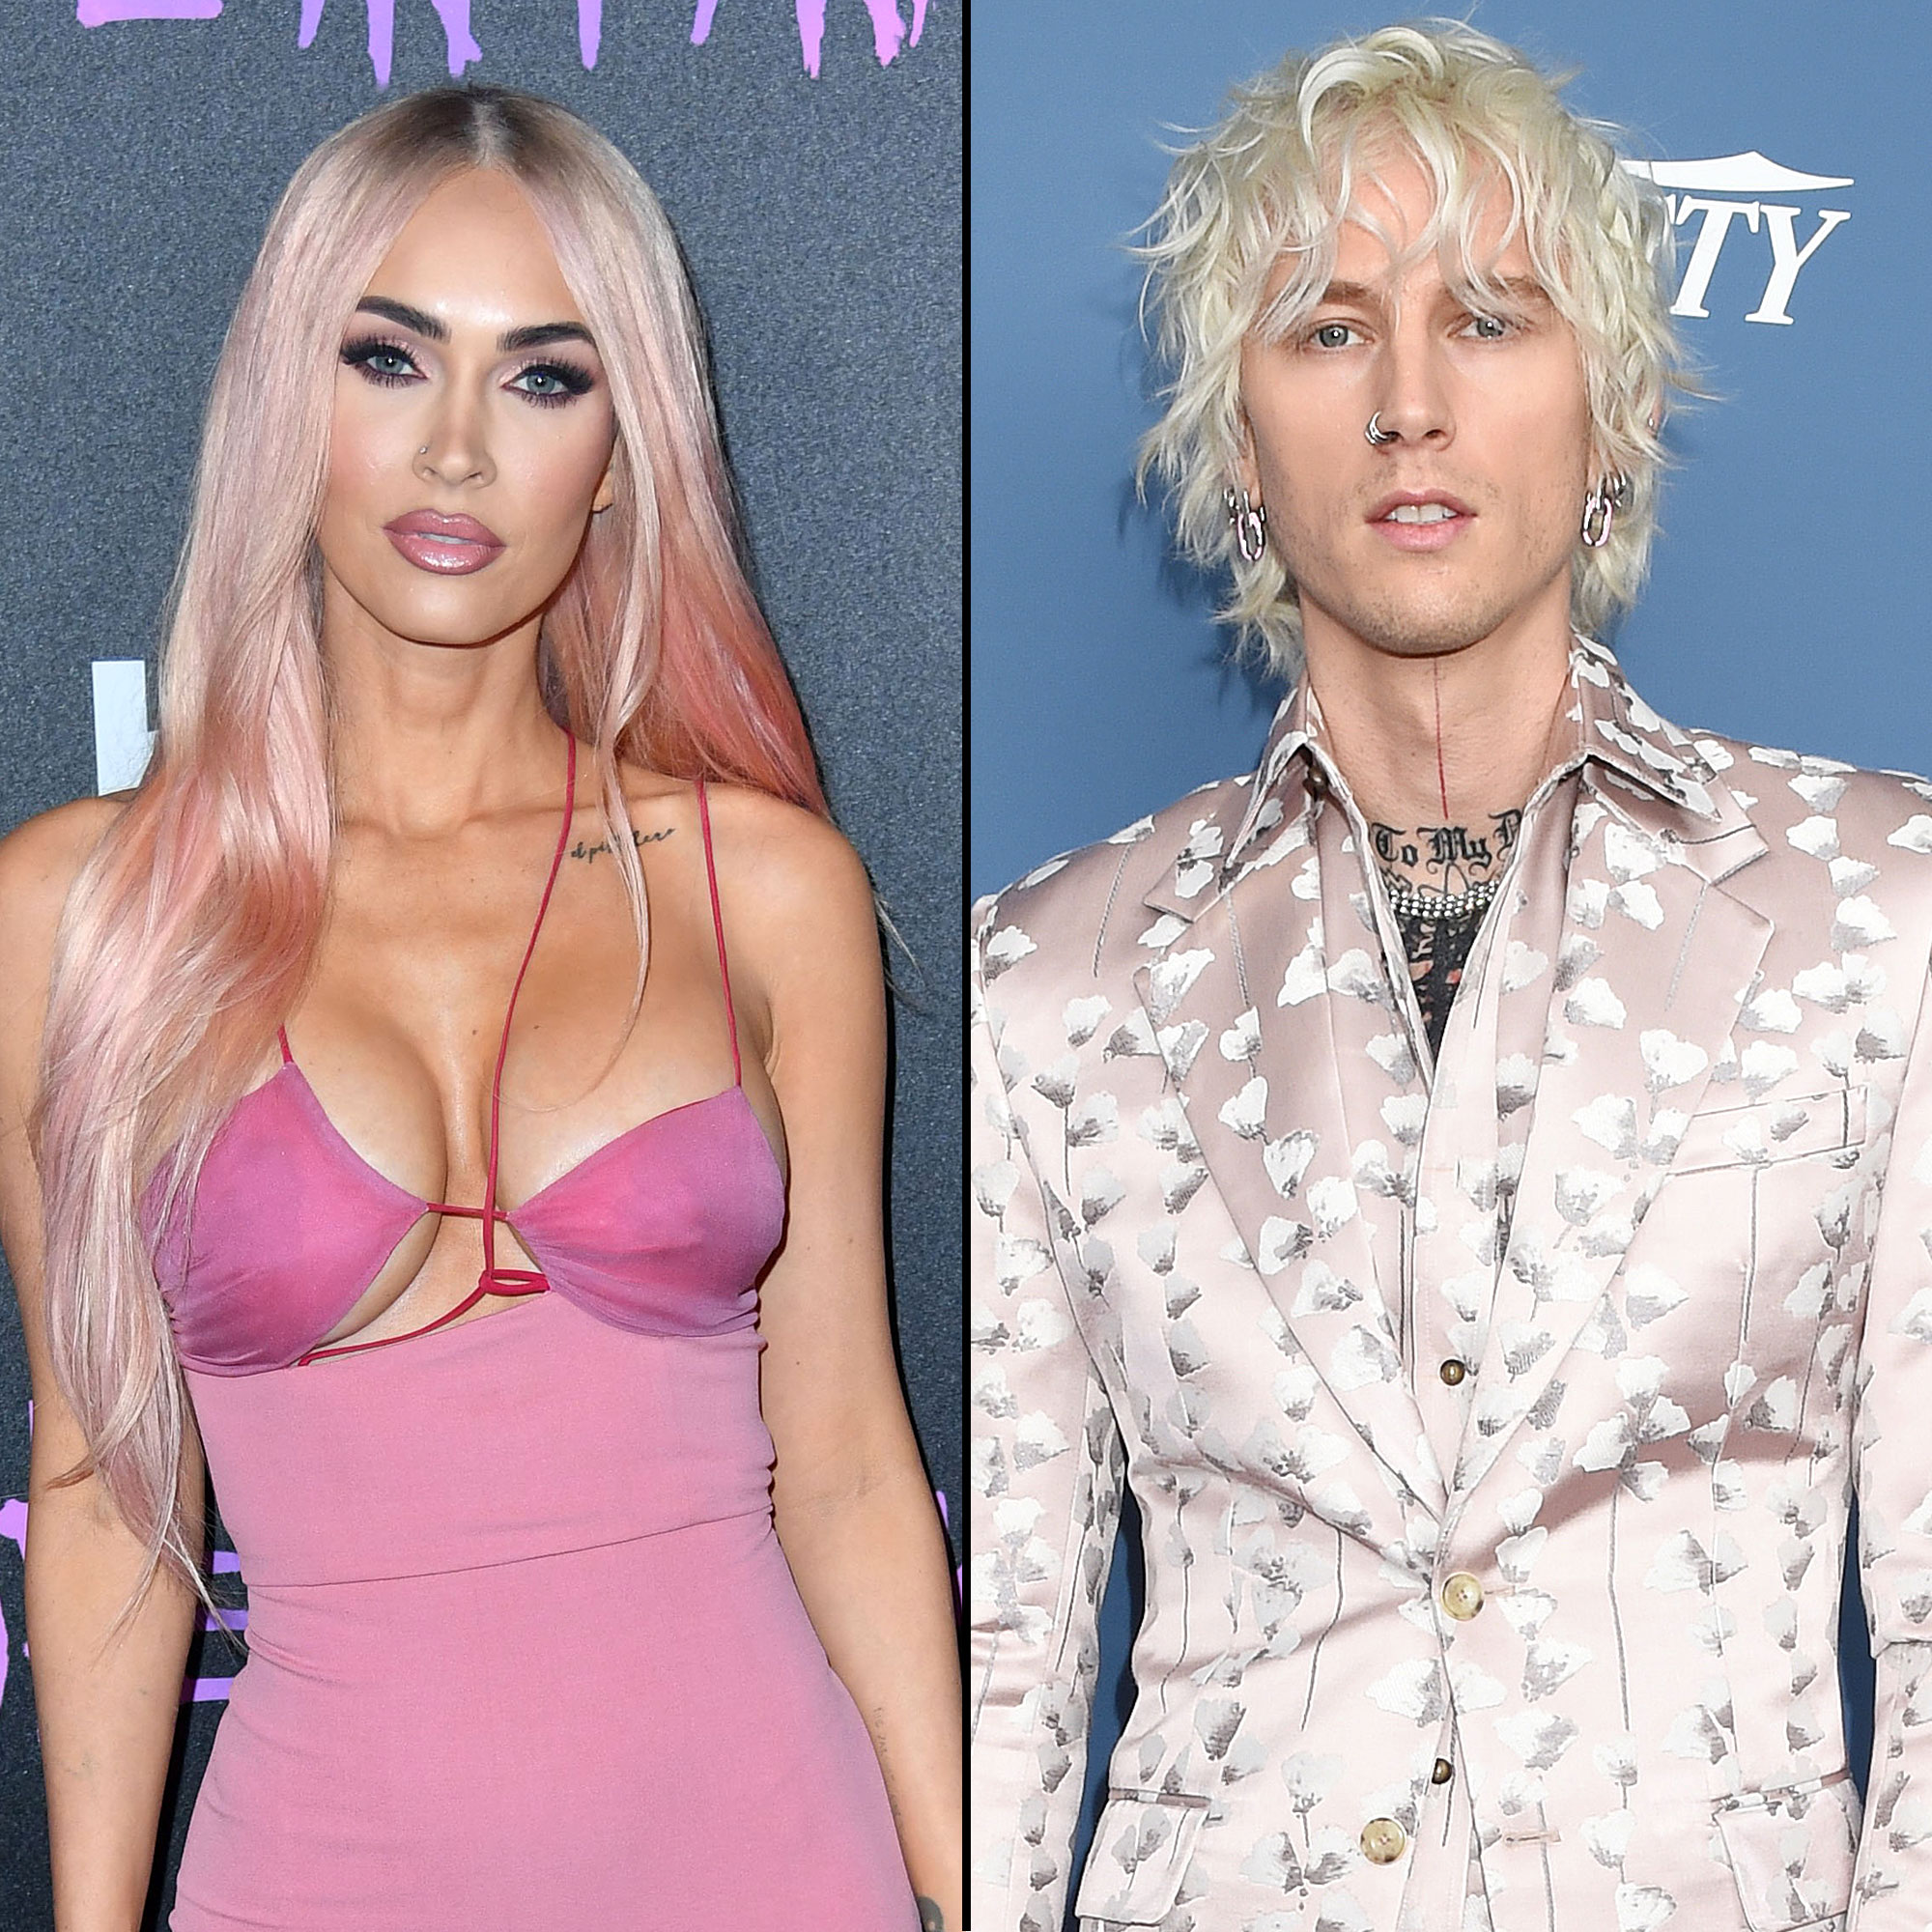 Megan Fox Responded to Fans Suggestion Machine Gun Kelly Cheated